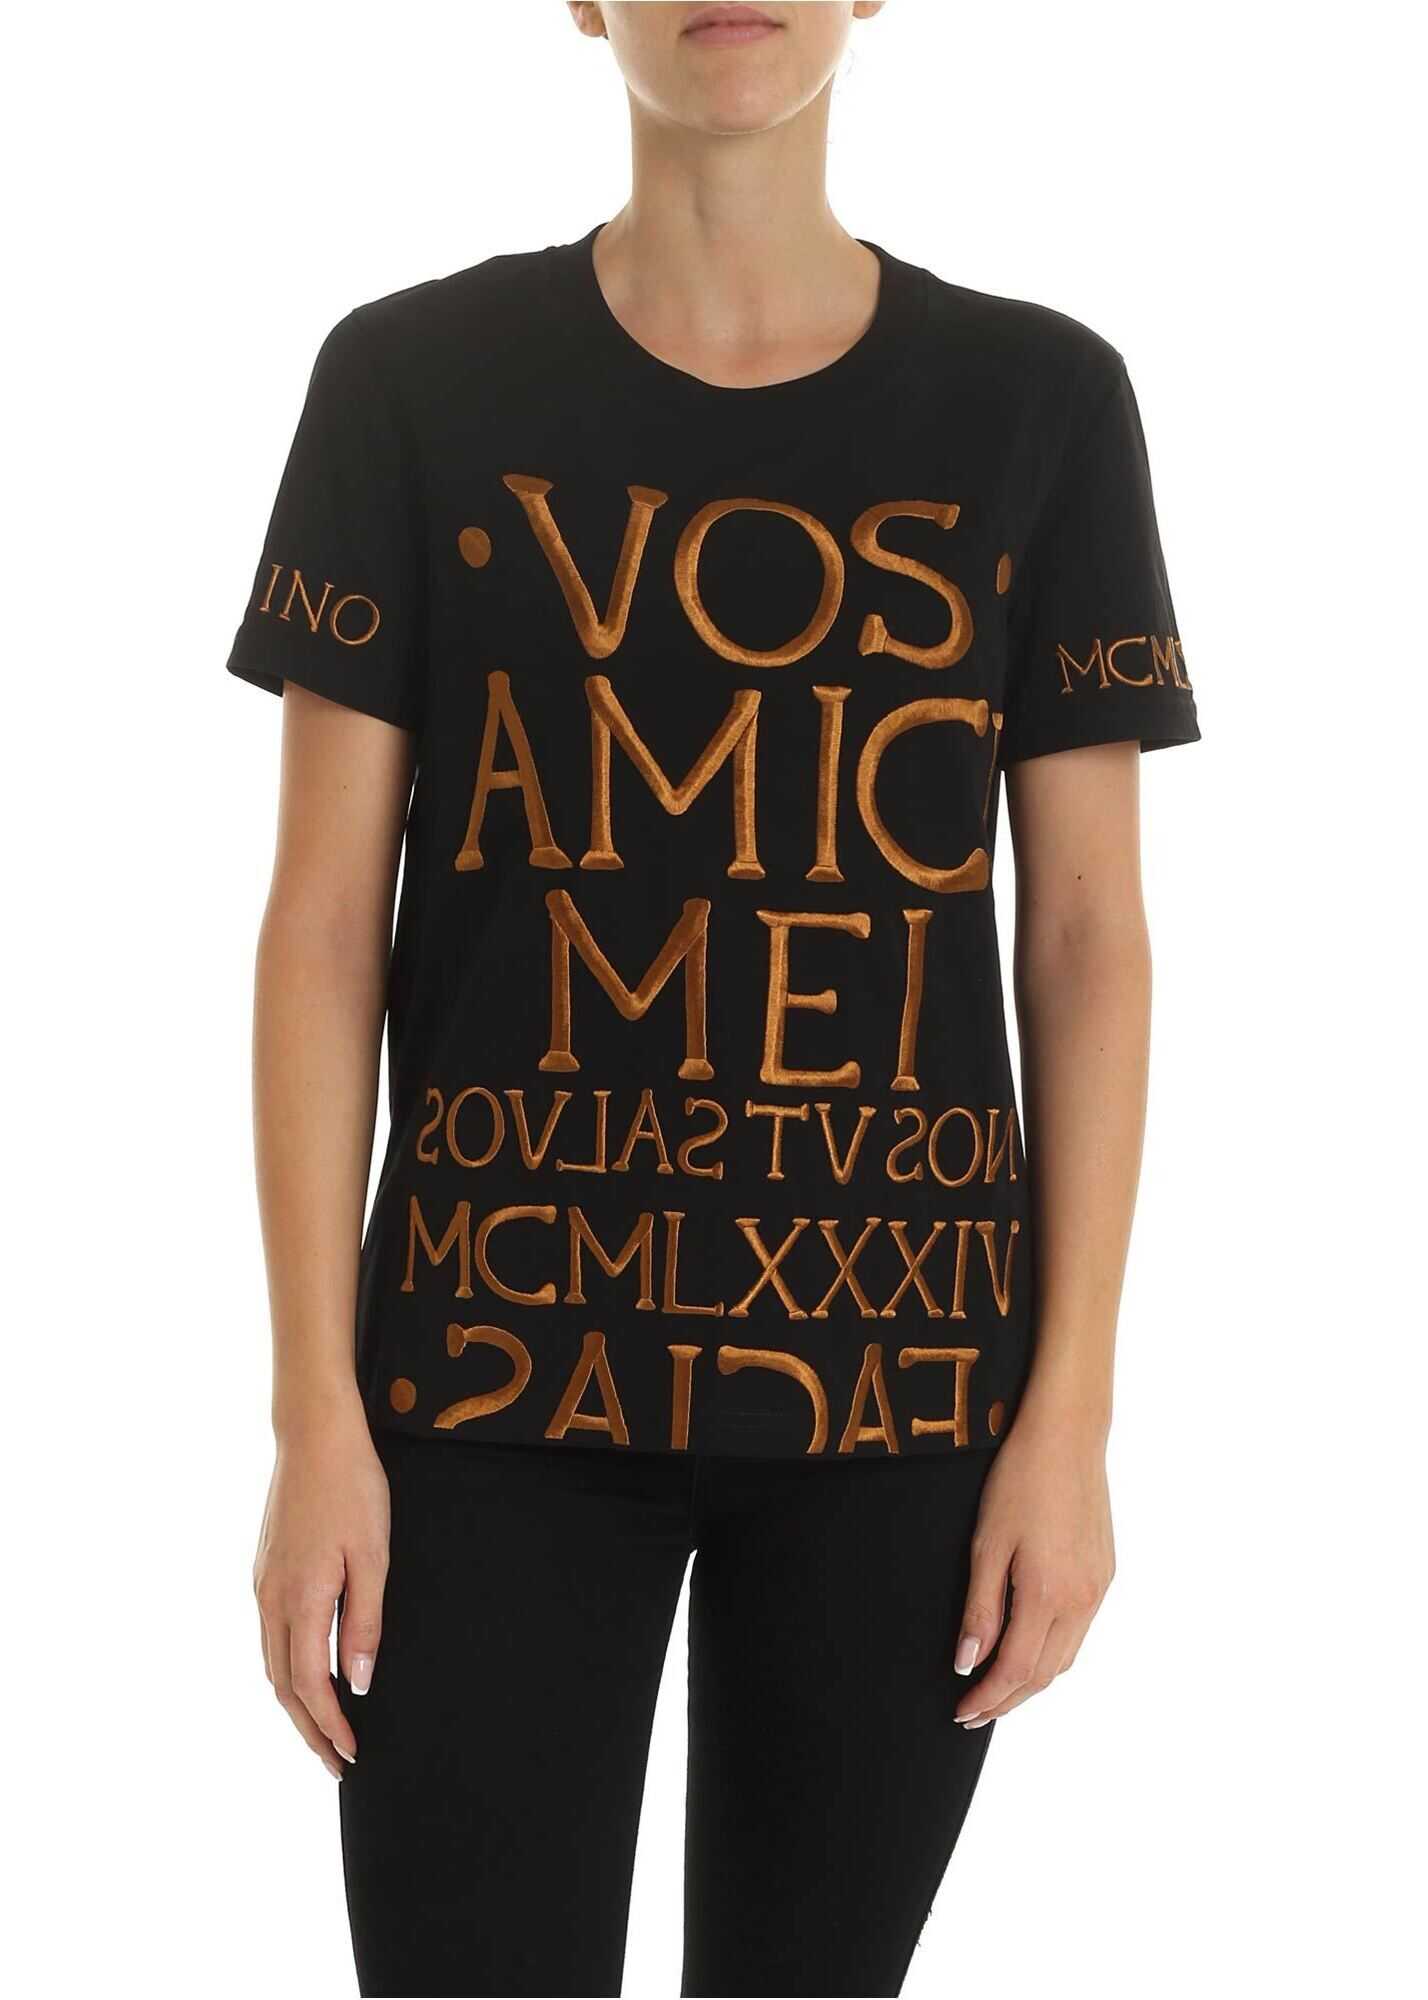 Moschino Vos Amici Mei T-Shirt In Black Black